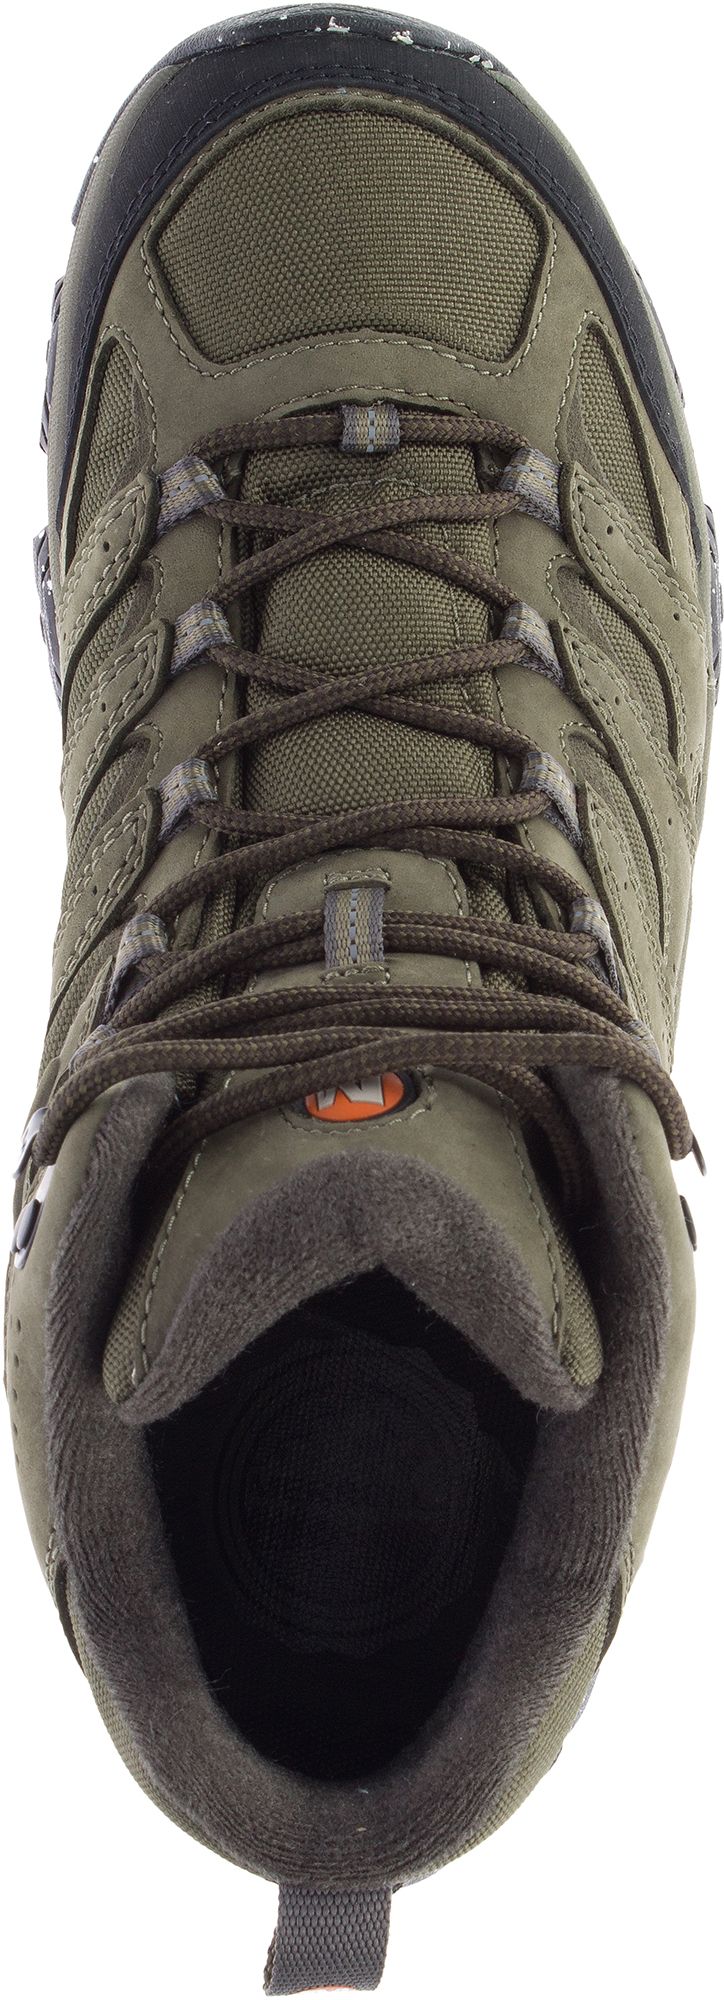 Merrell Men's Moab 3 Smooth Mid GORE-TEX Hiking Boots